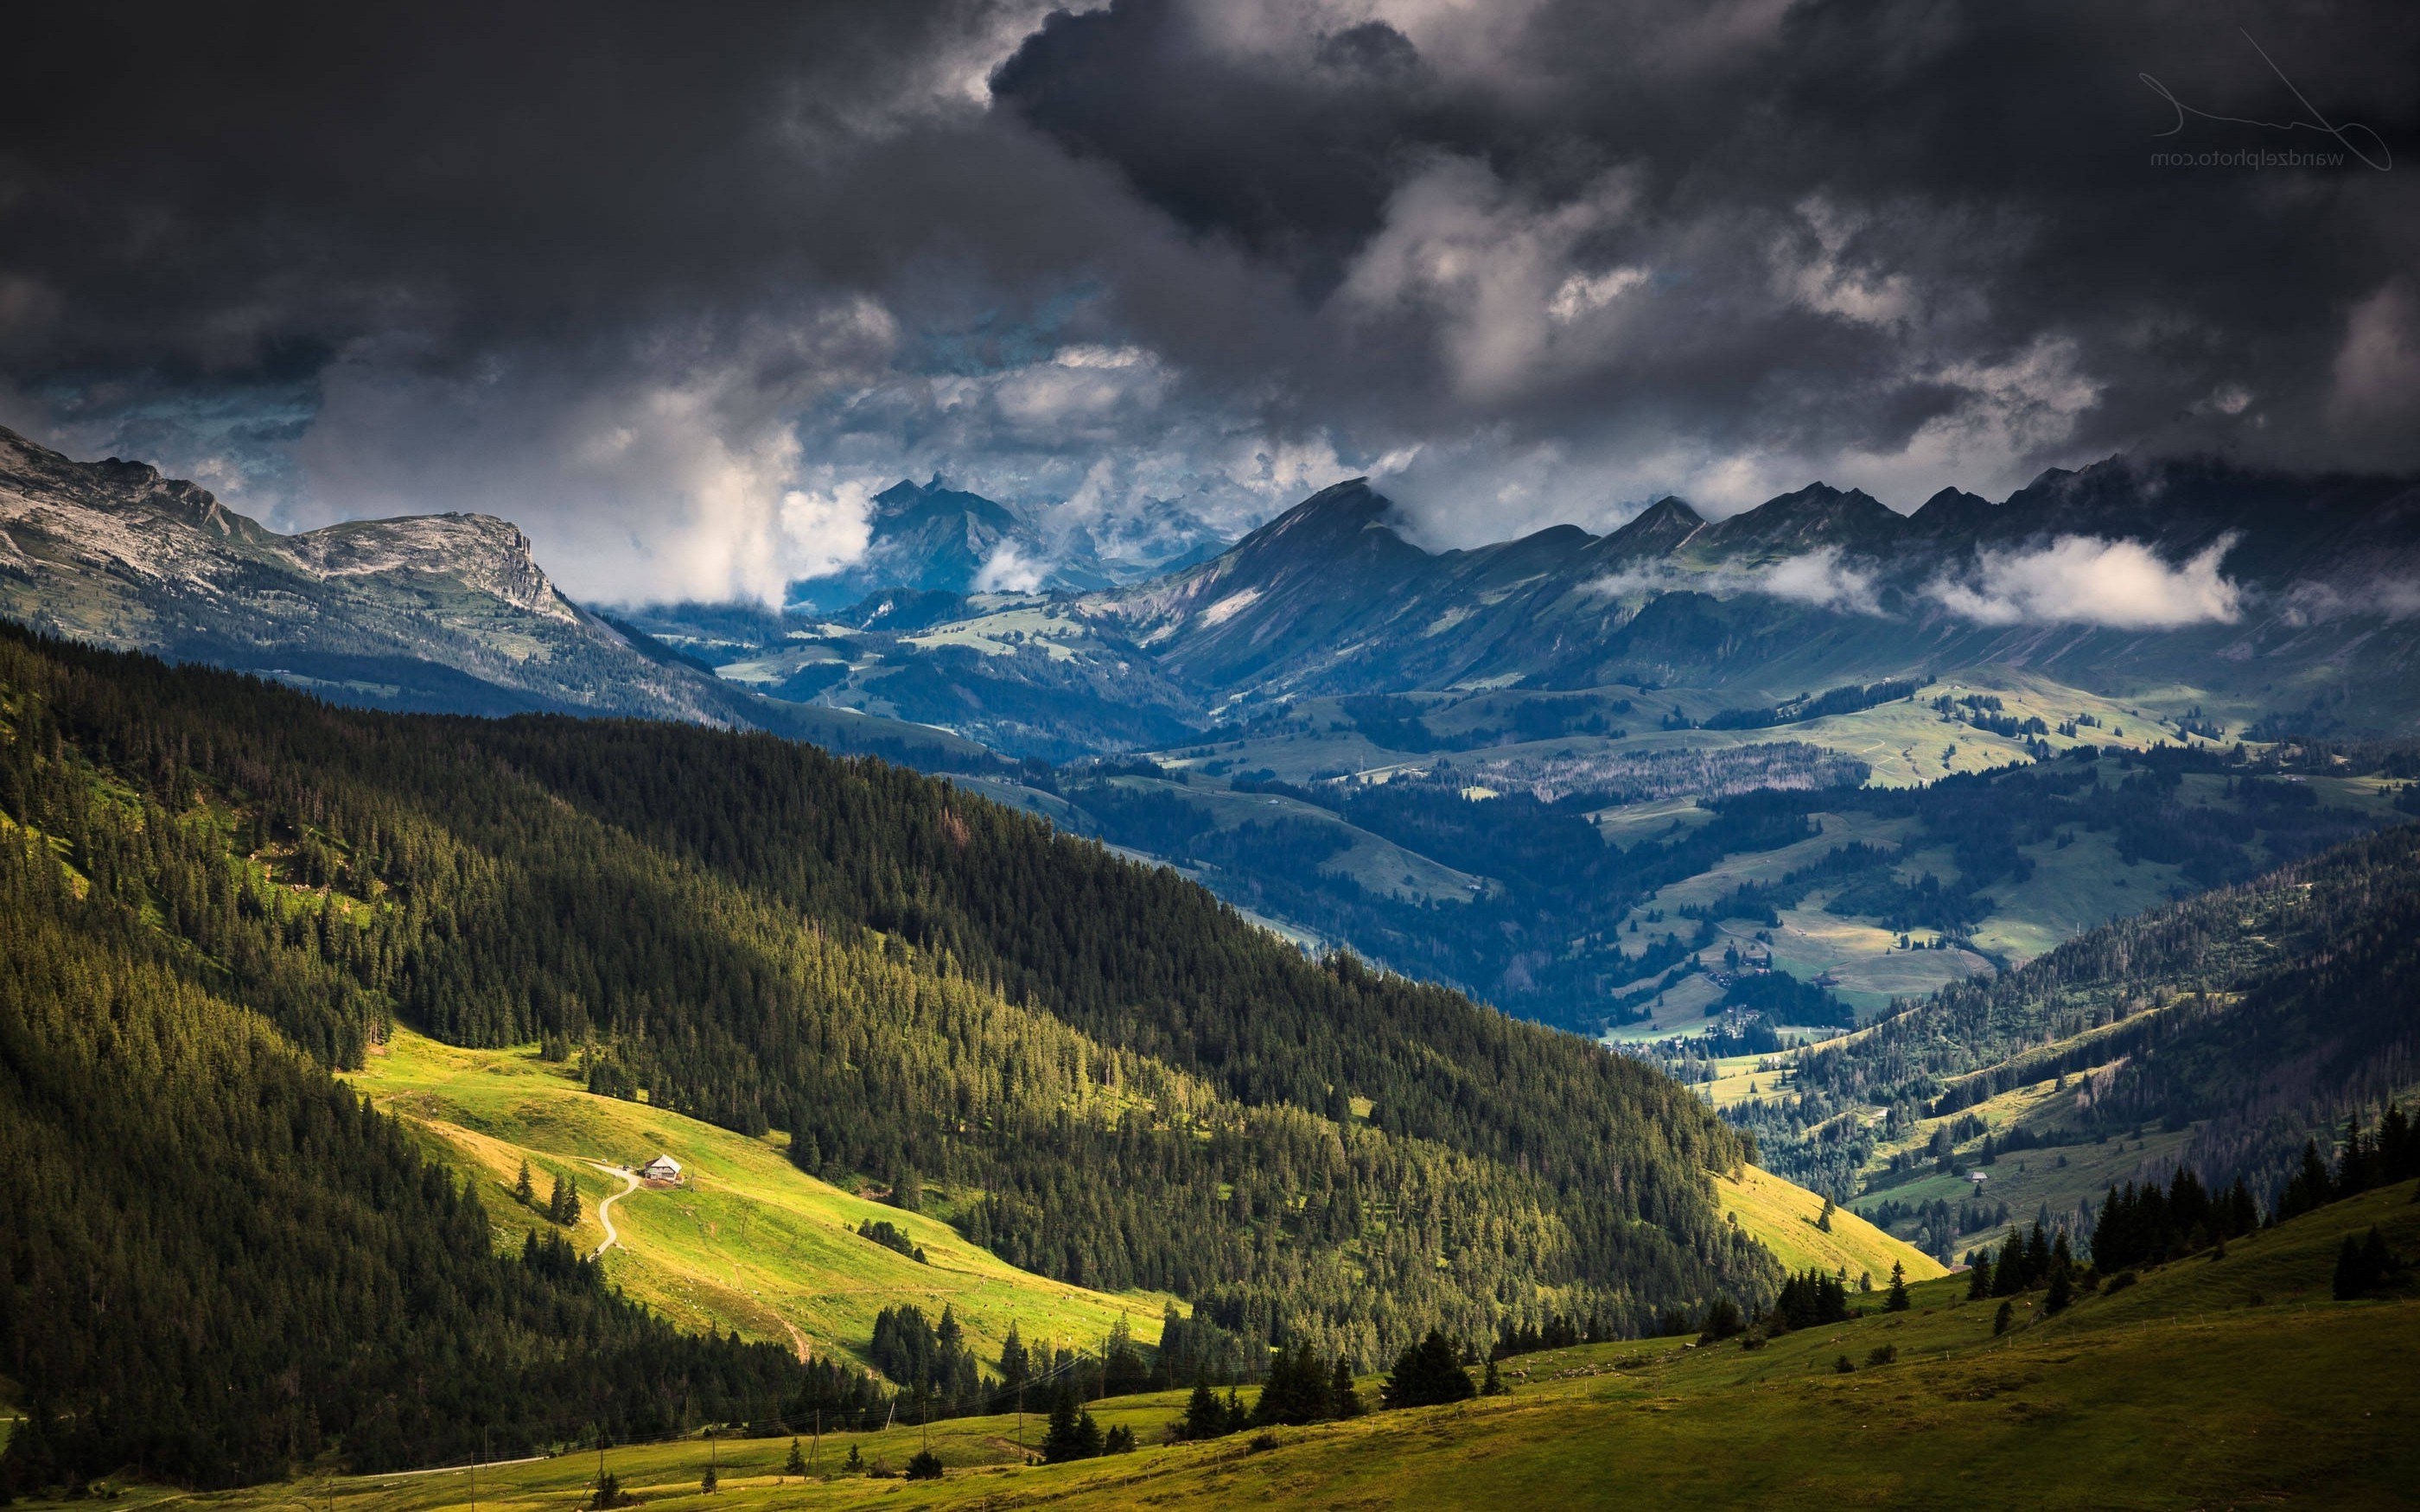 Landscape Nature Mountain Forest Alps Clouds Switzerland Green